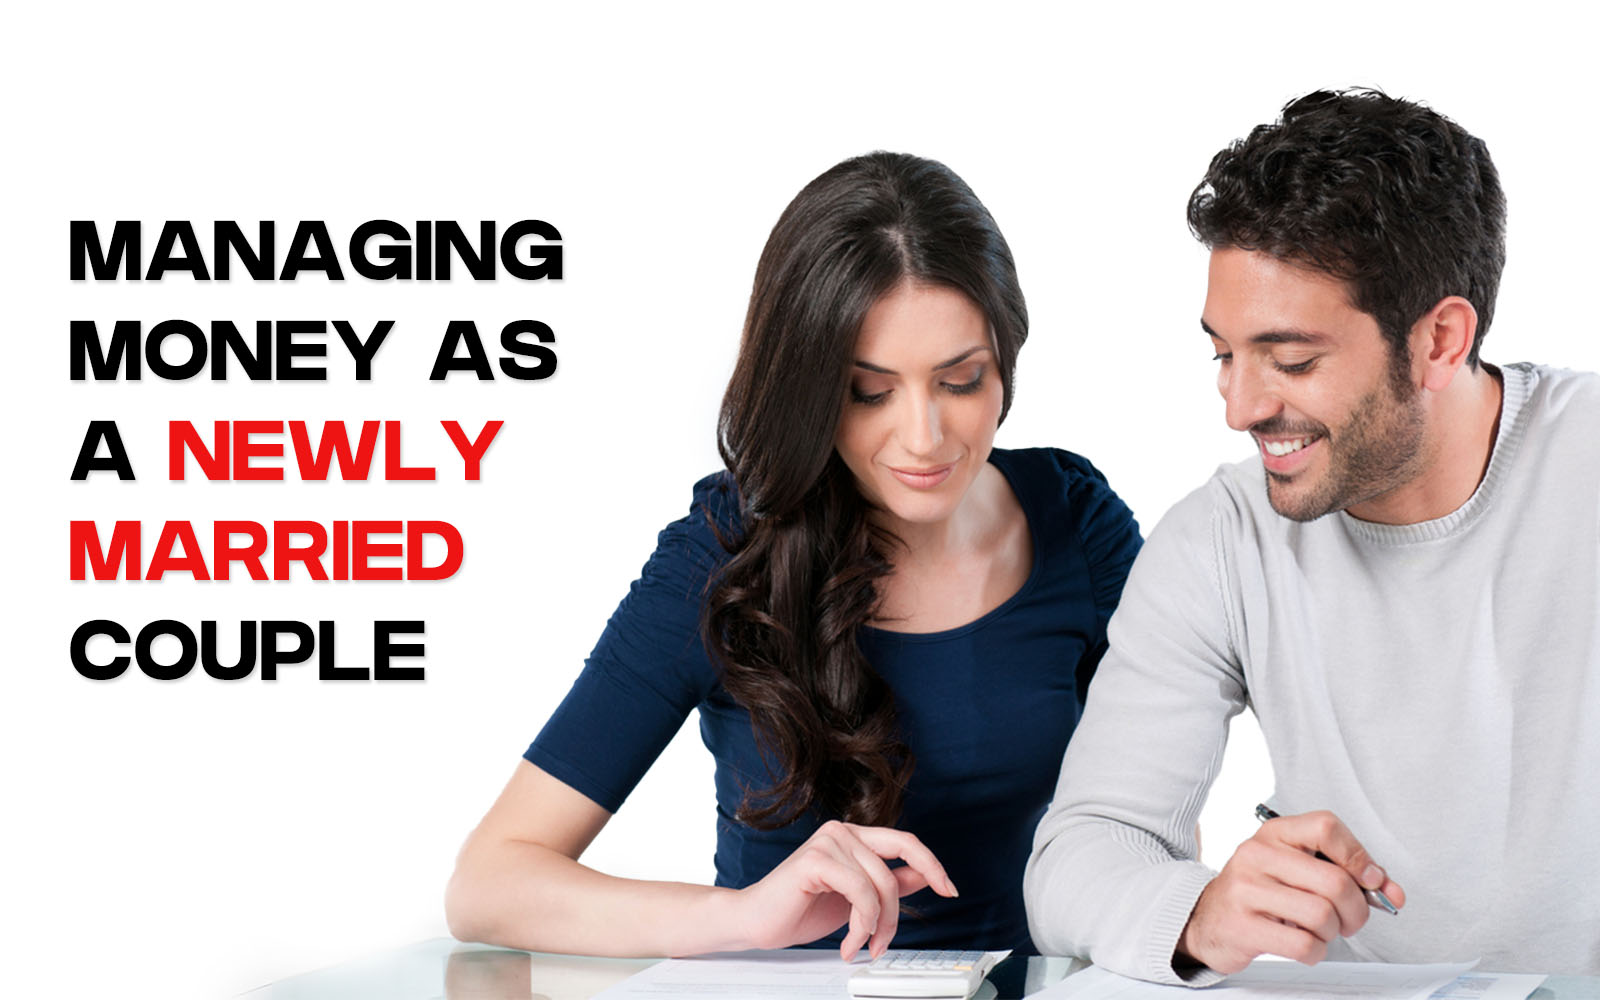 Managing Money as a Newly Married Couple